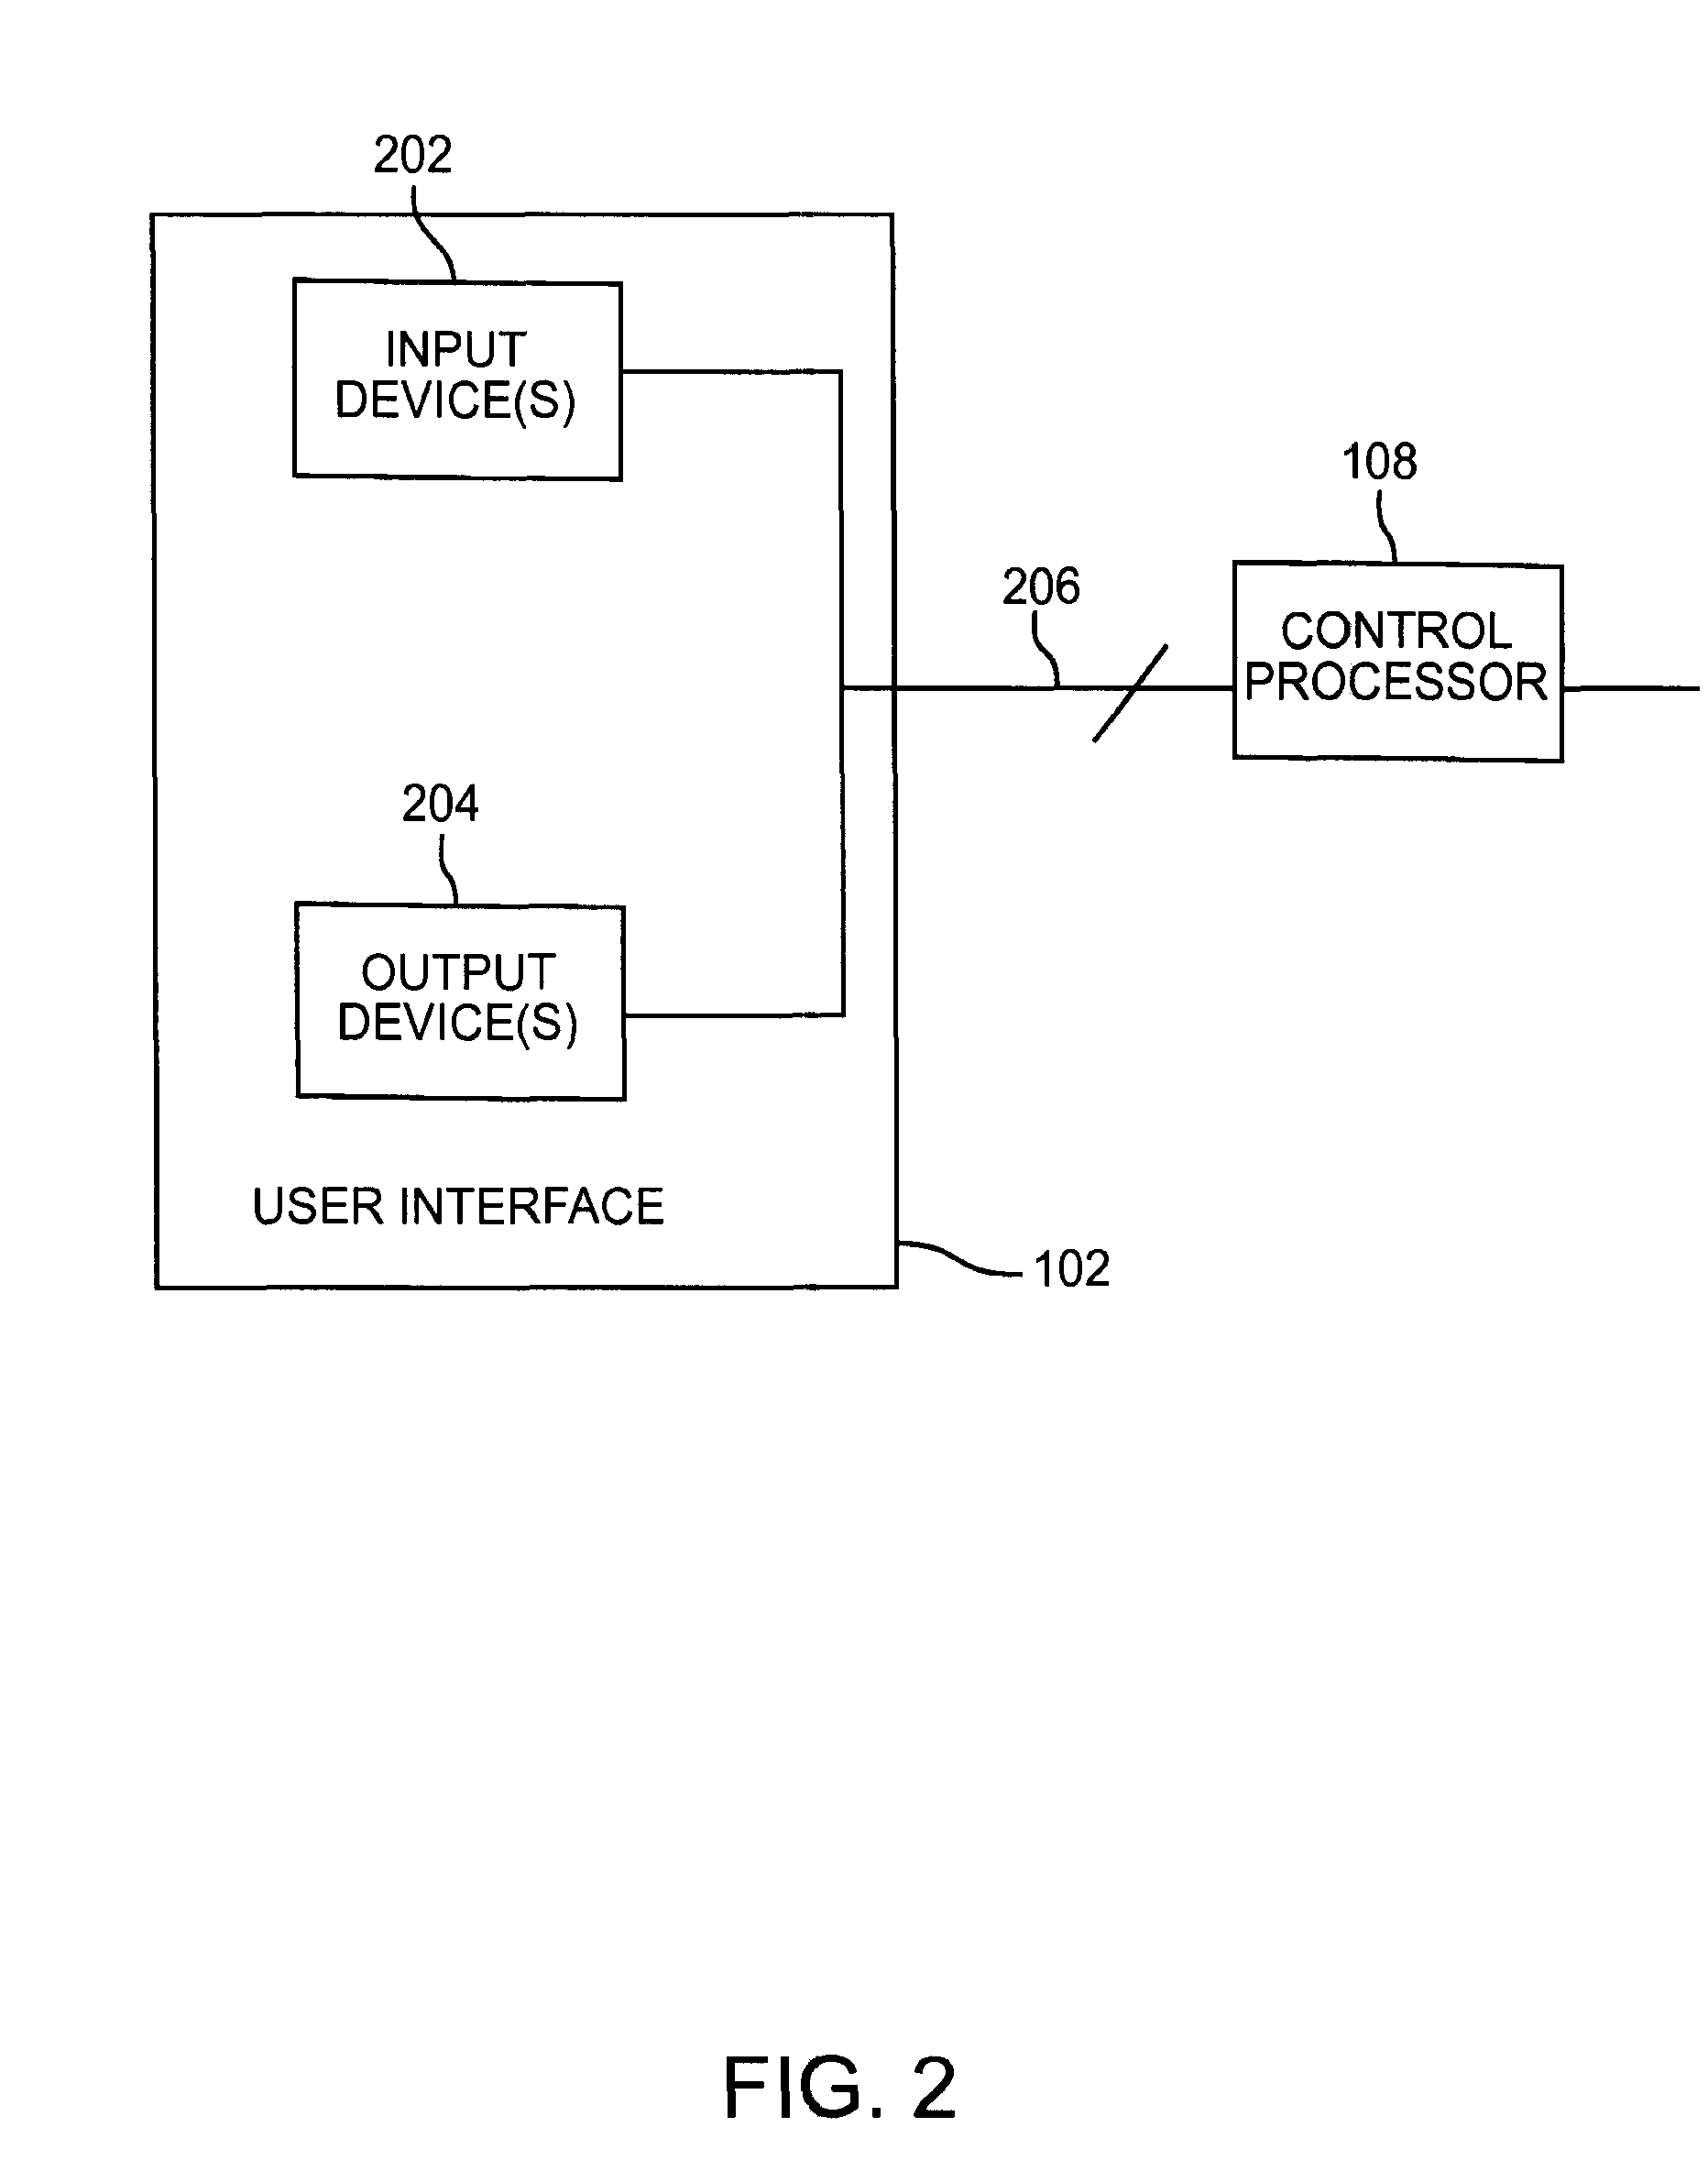 System and method for the operation of diagnostic medical equipment